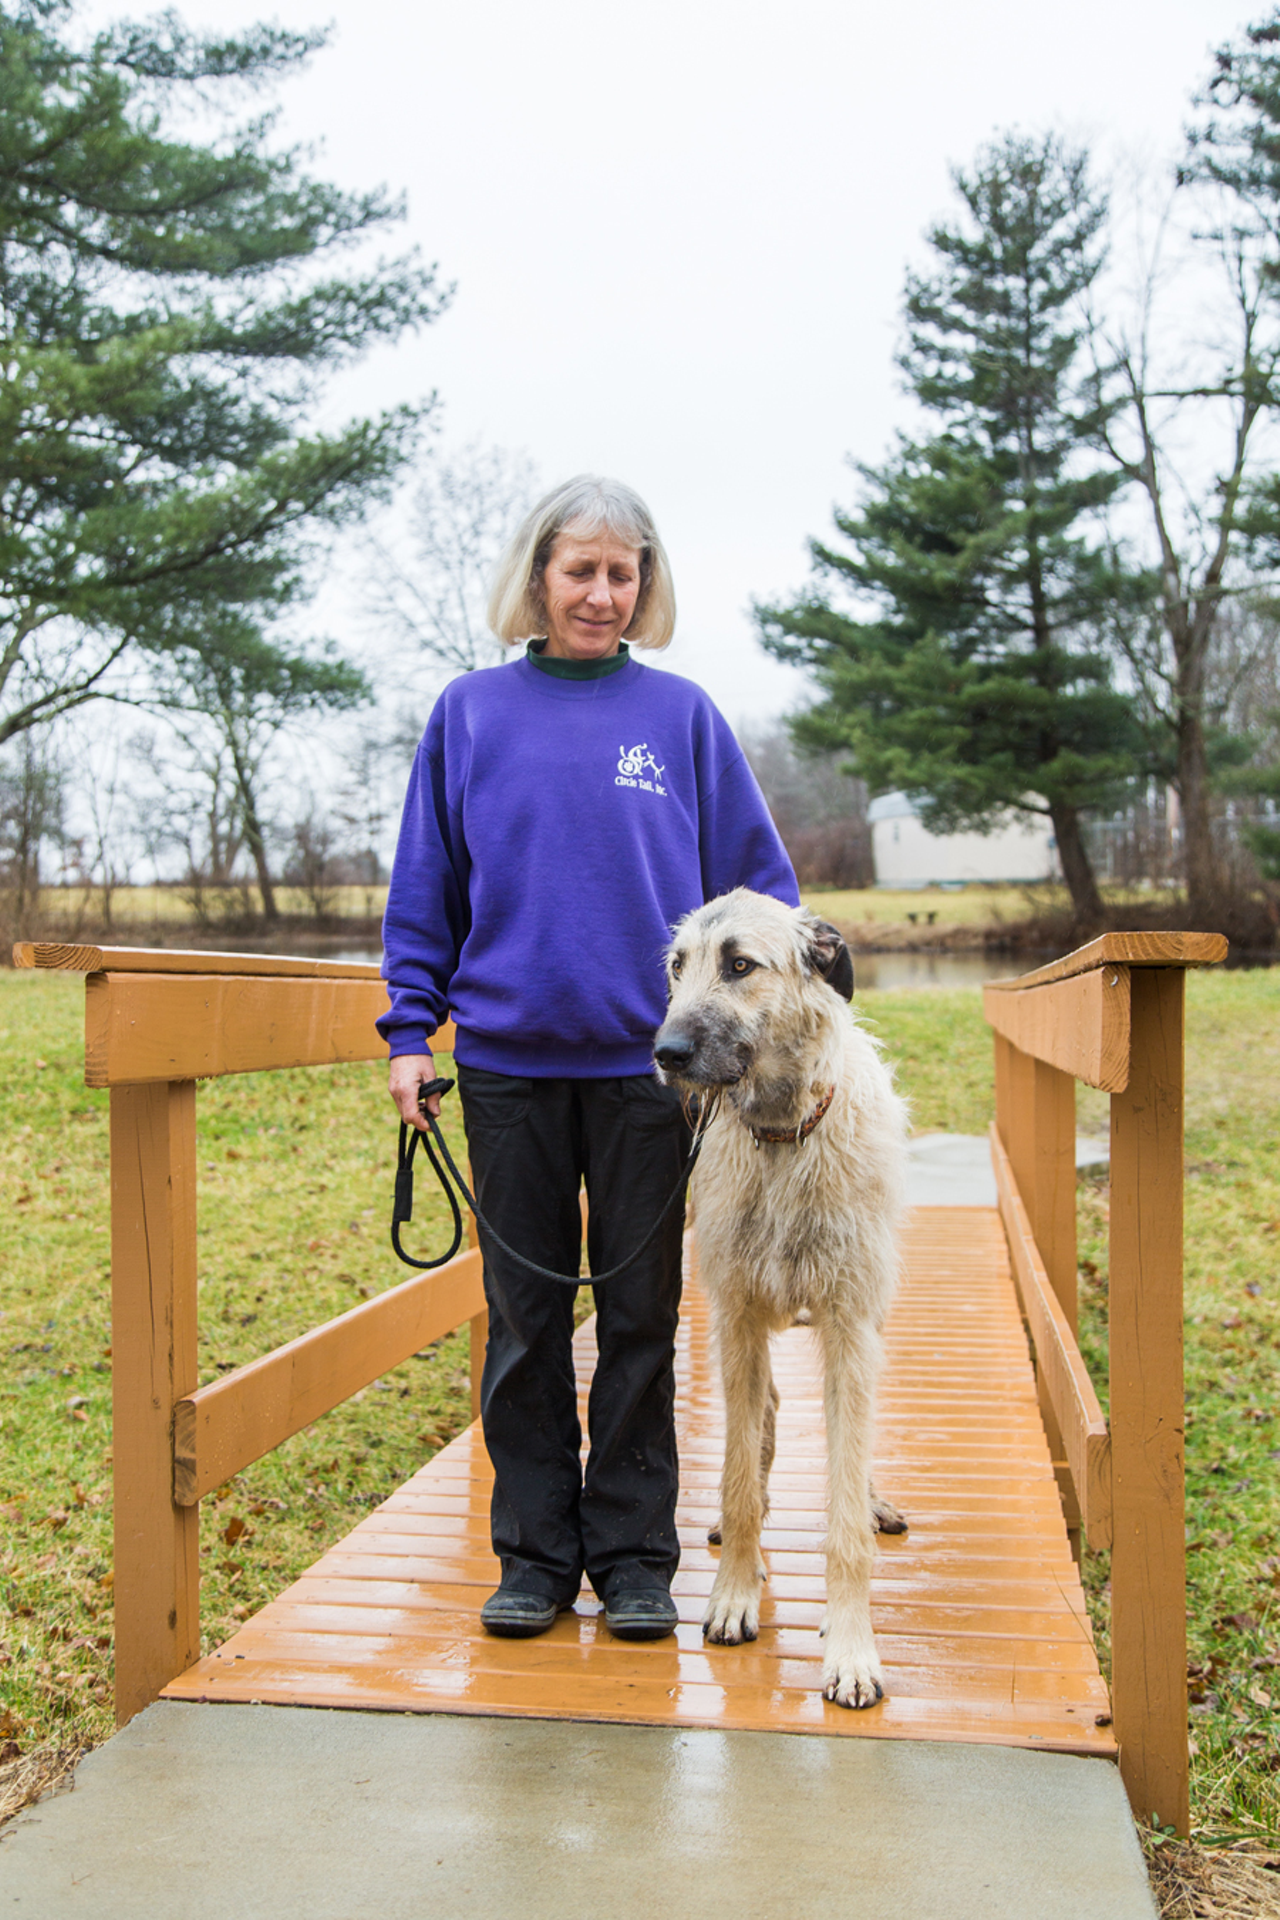 Marlys Staley, founder of nonprofit Circle Tail, which provides service dogs to individuals with disabilities